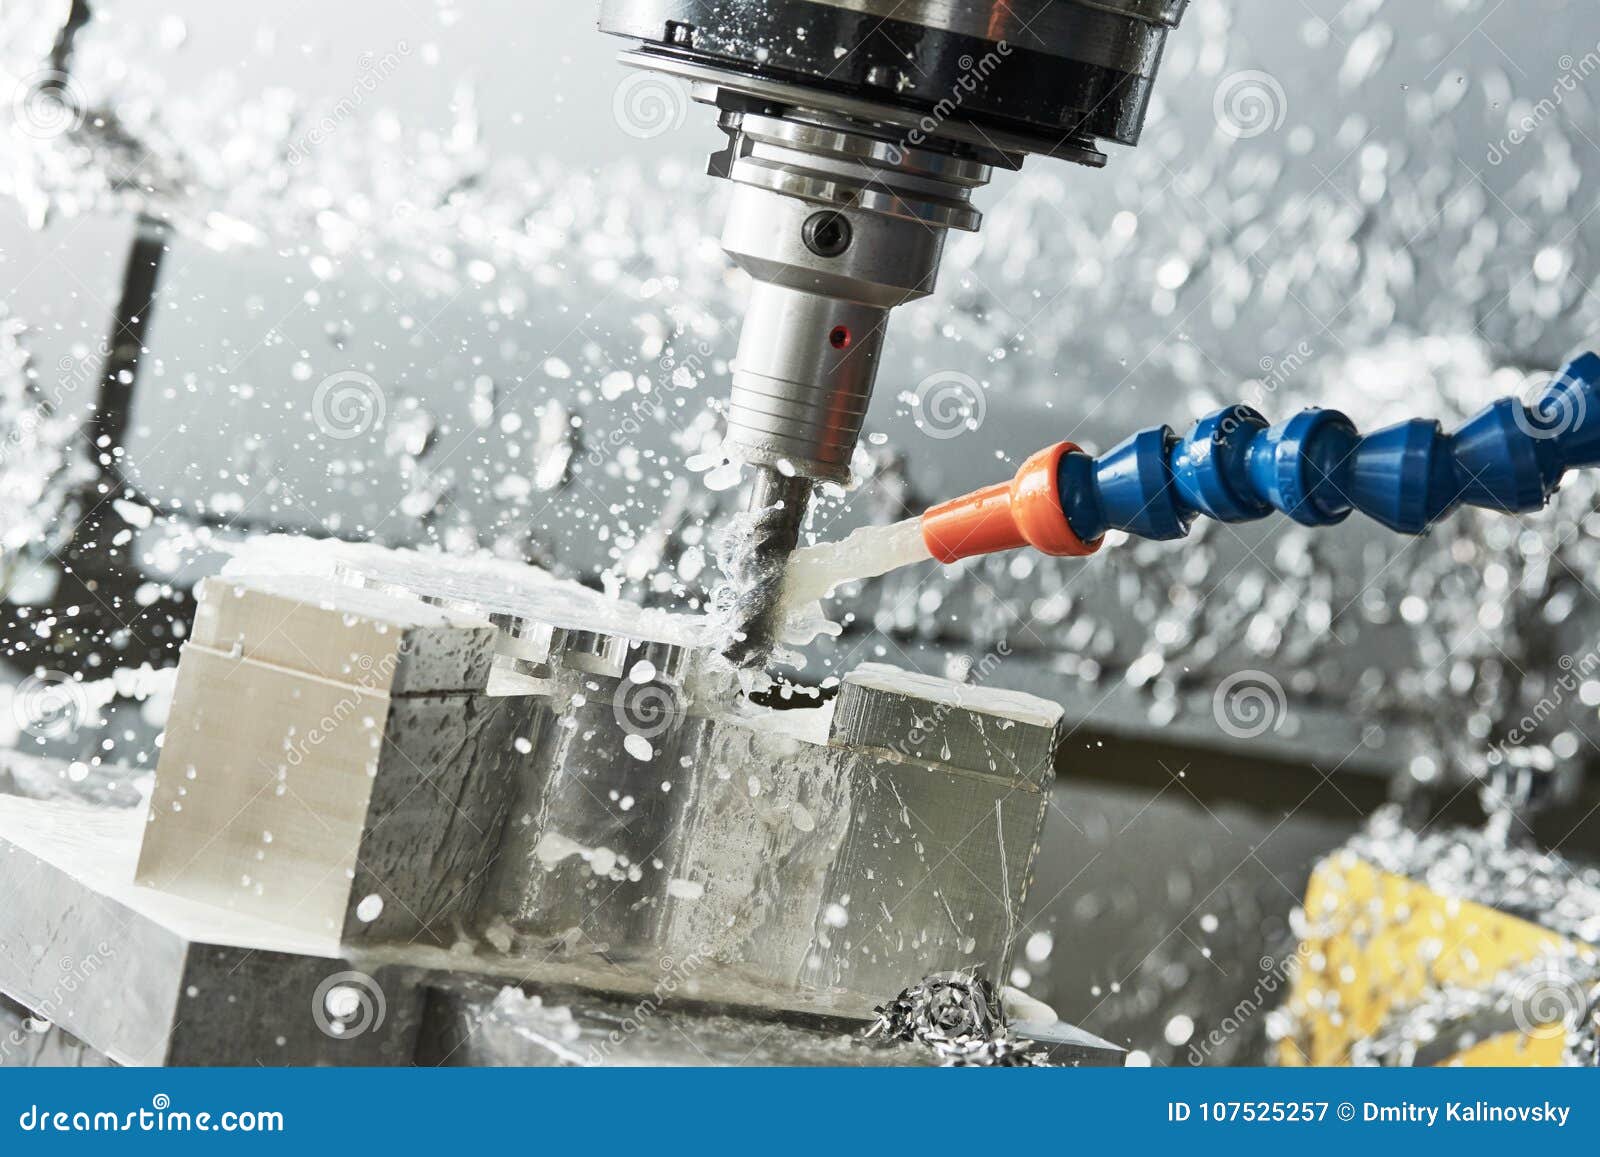 milling metalworking process. industrial cnc metal machining by vertical mill